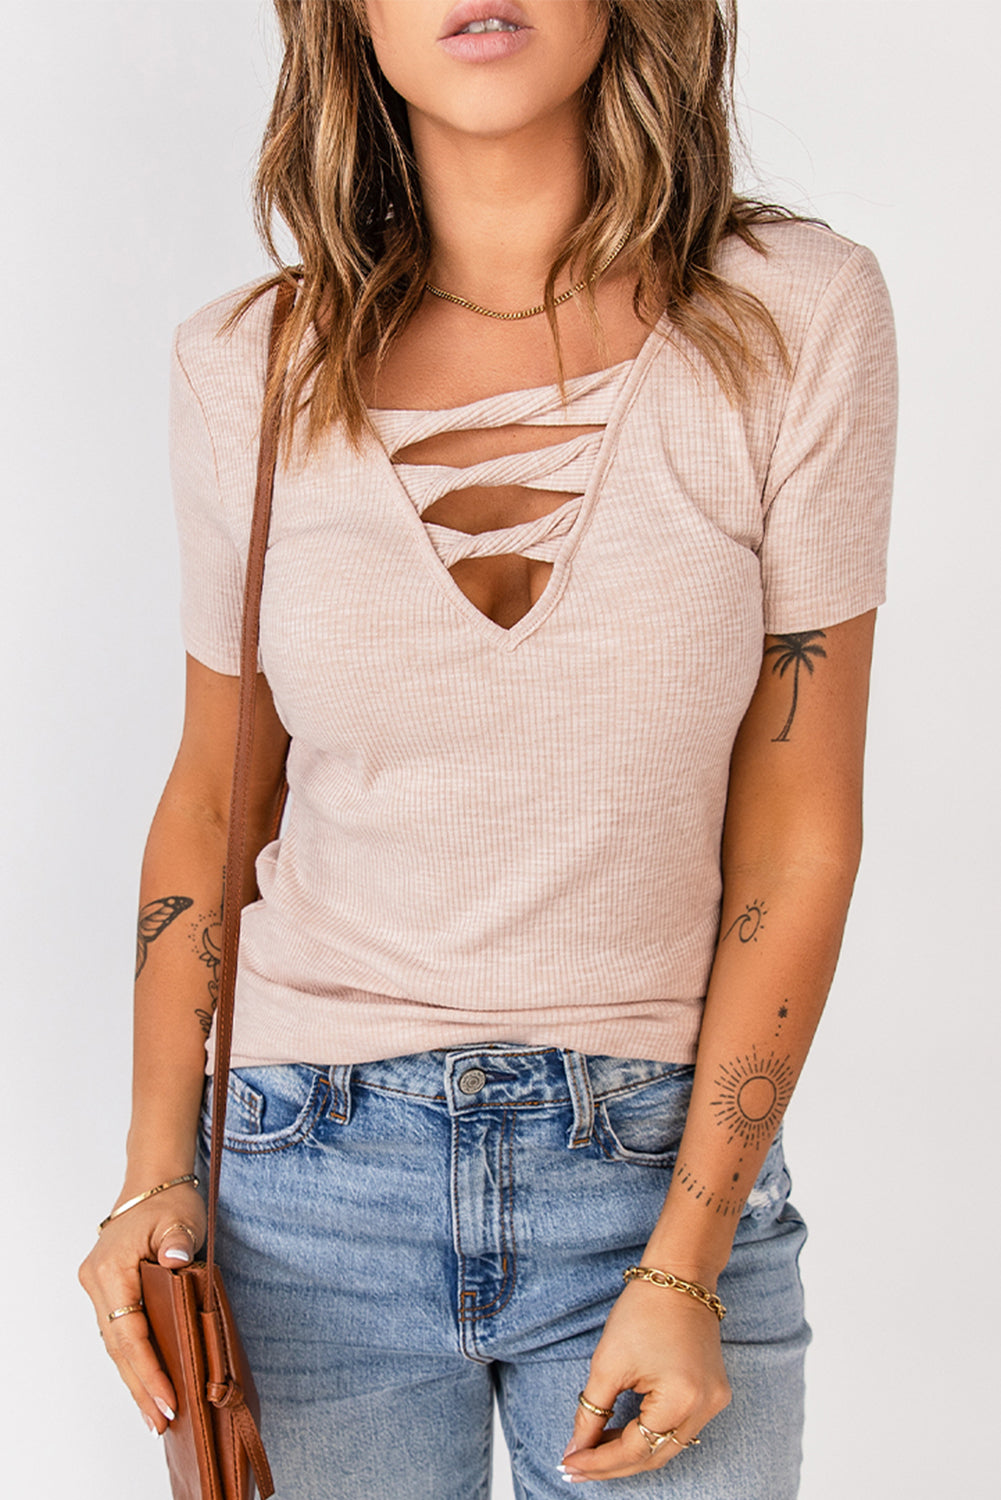 Strappy T-Shirt - The Lakeside Boutique